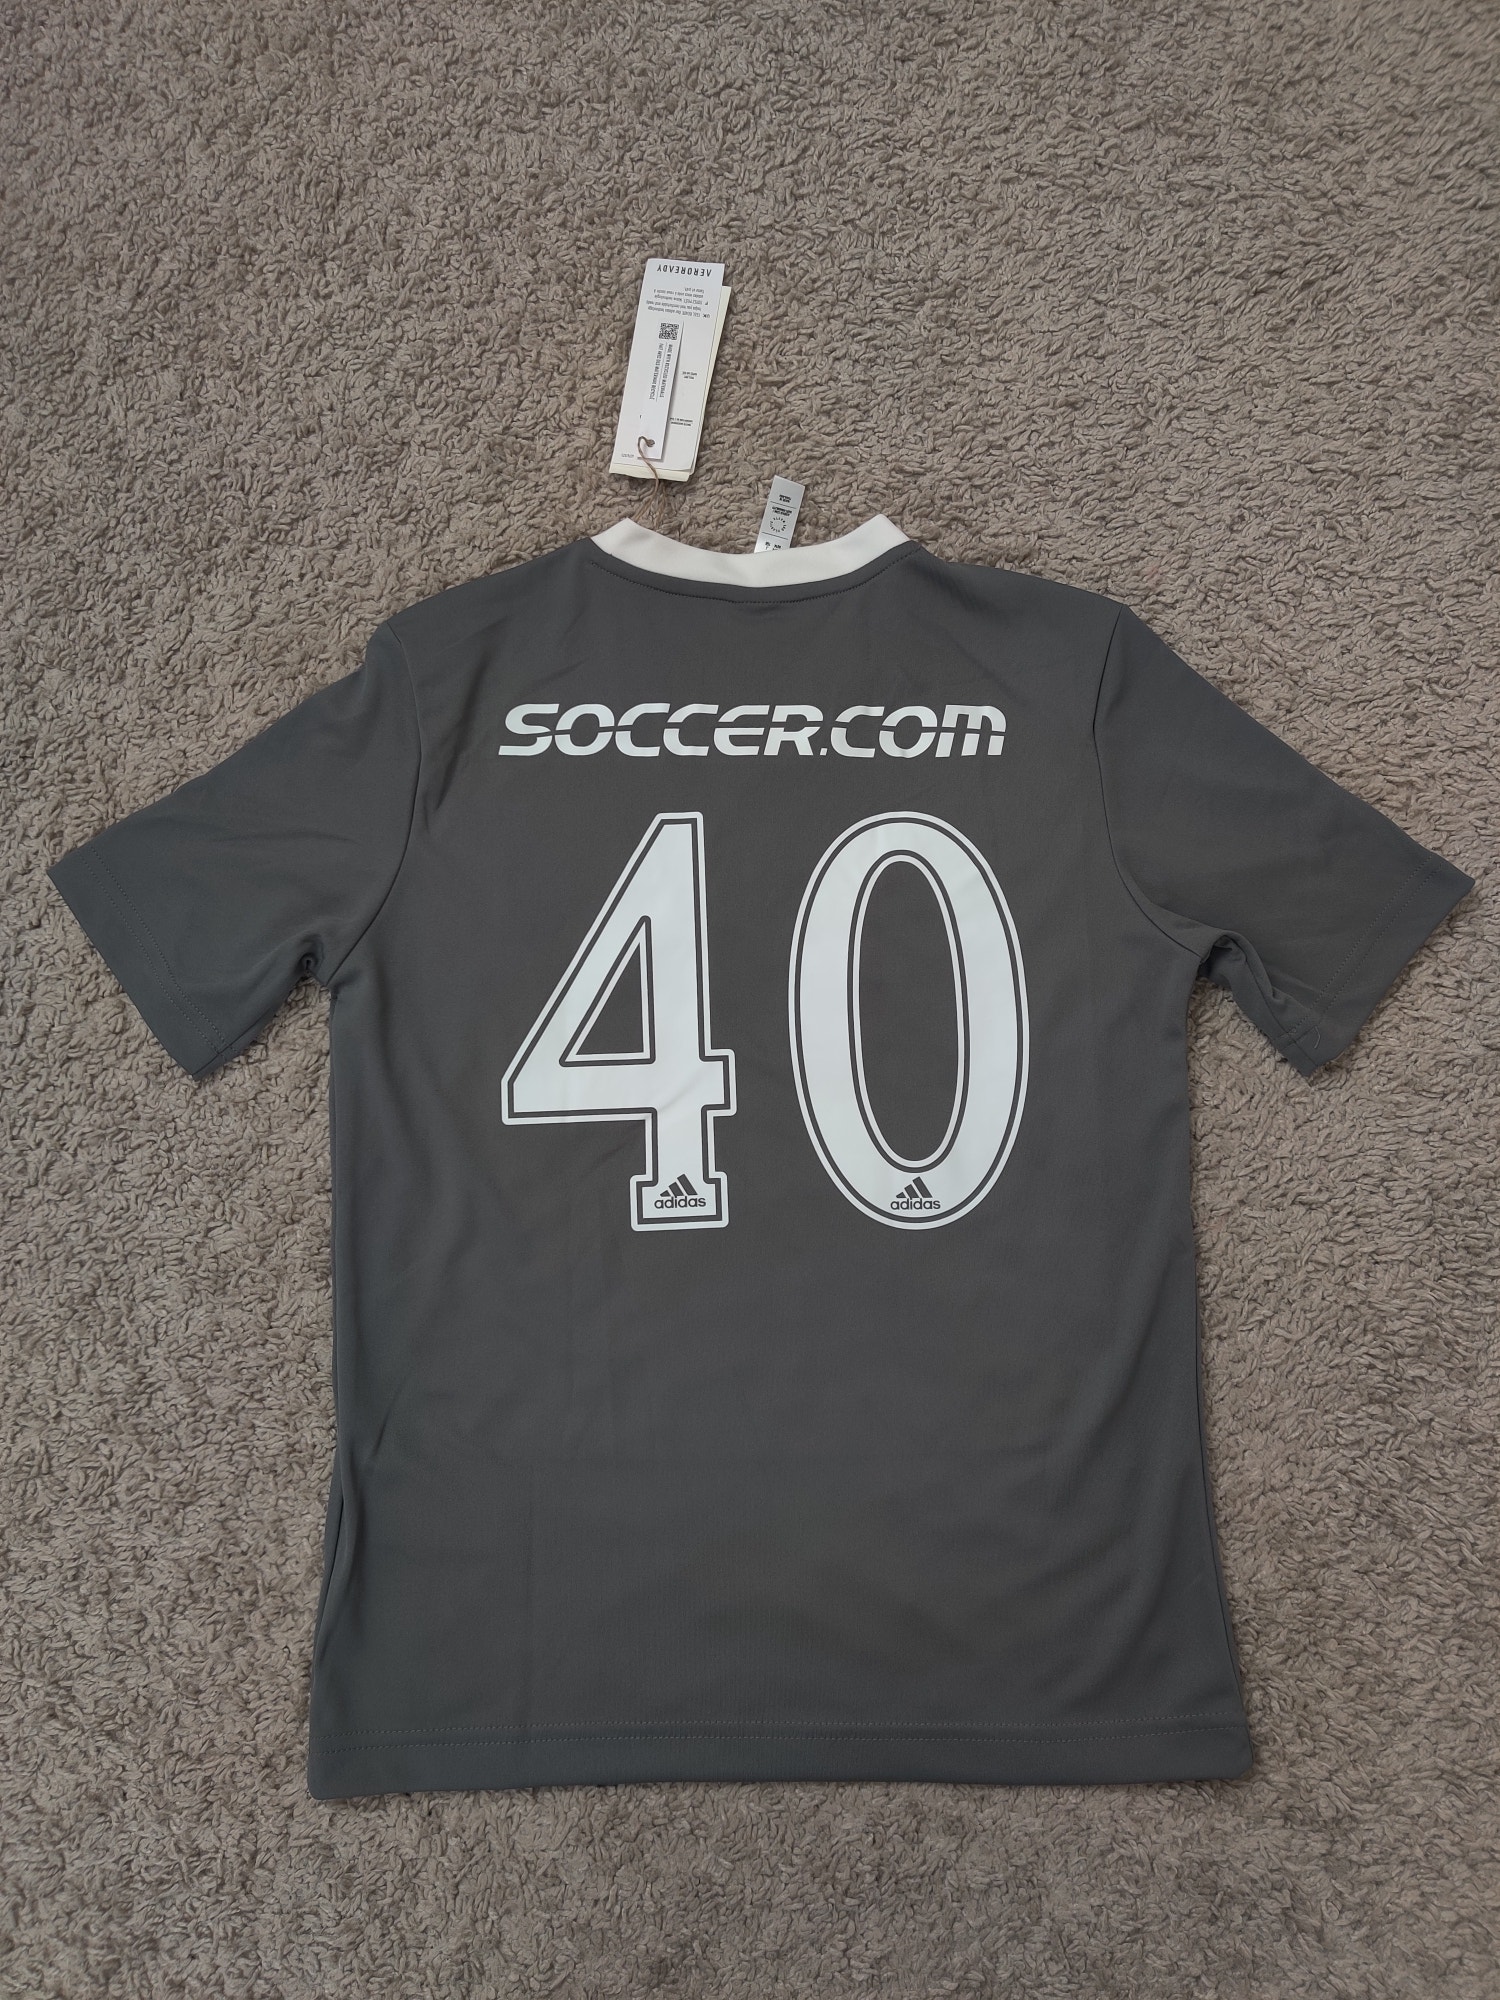 (V) NEW Adidas Youth Falcons Four Cornes FC #40 shirt soccer jersey sz M - Picture 8 of 9